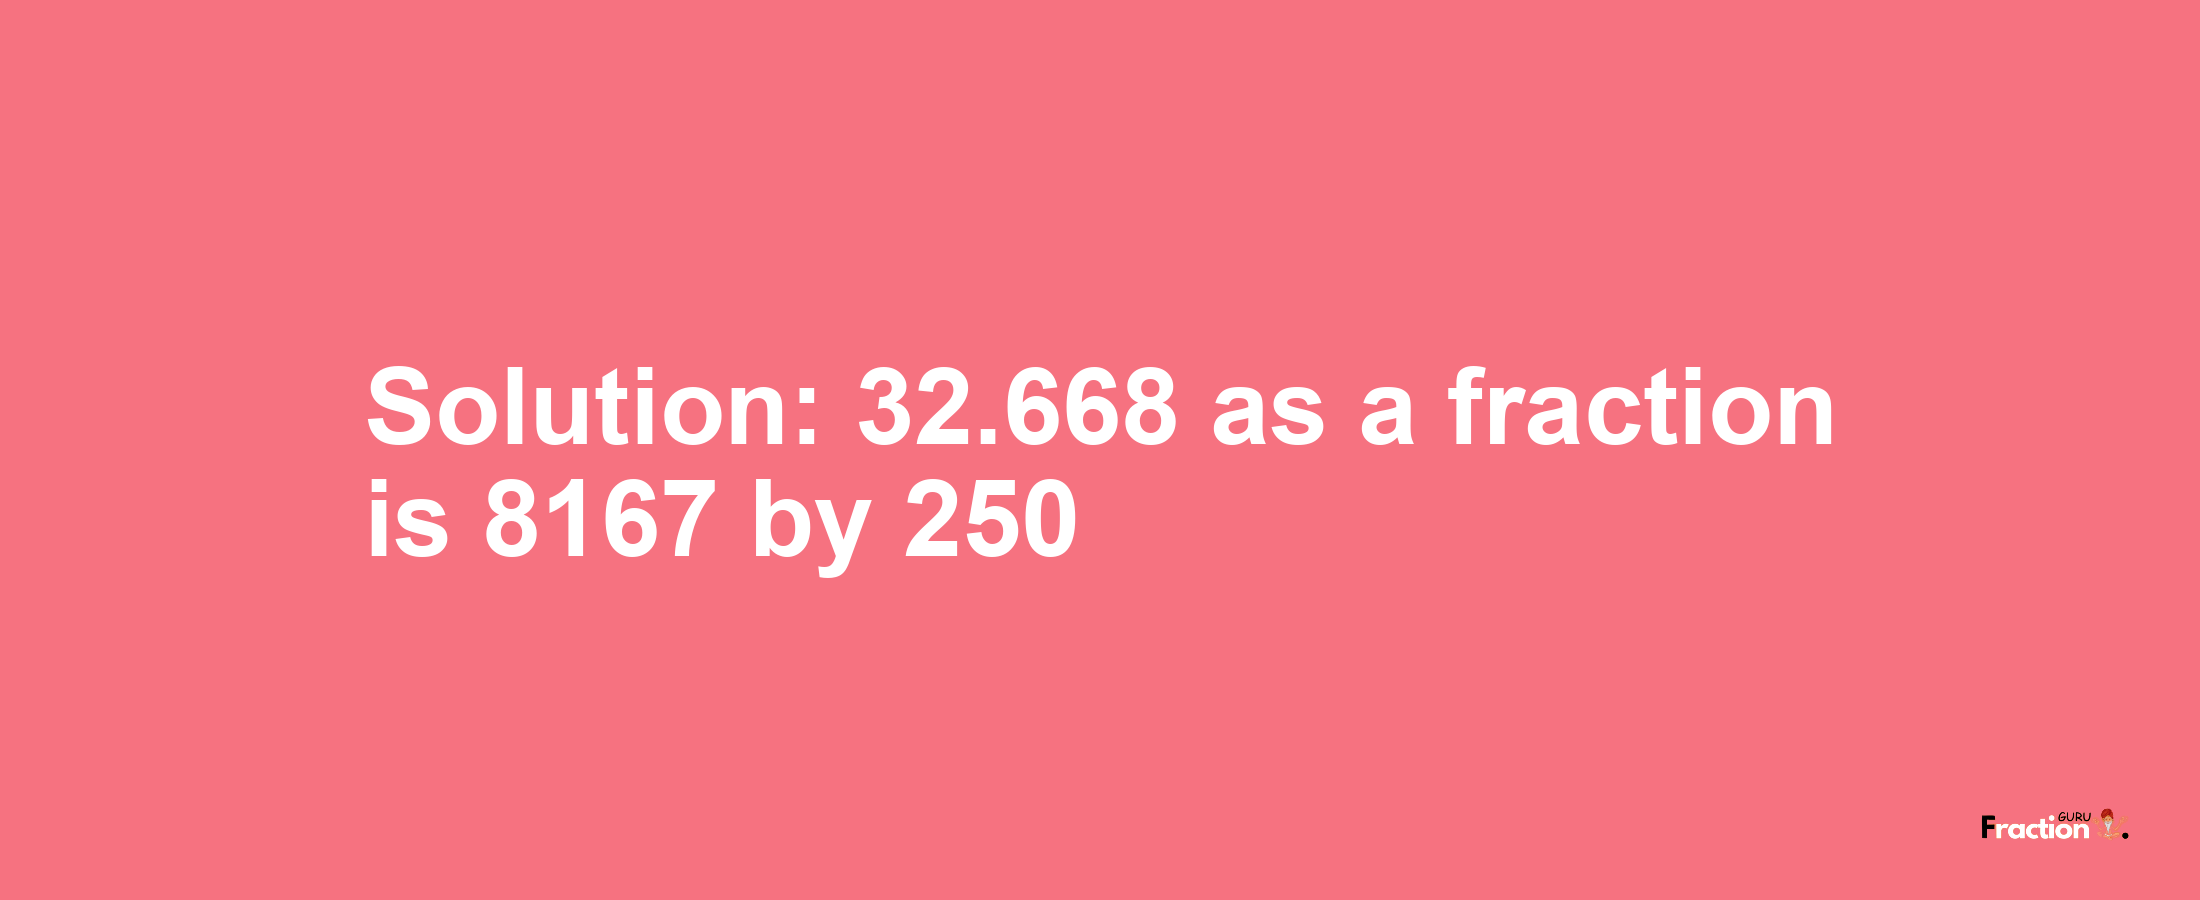 Solution:32.668 as a fraction is 8167/250